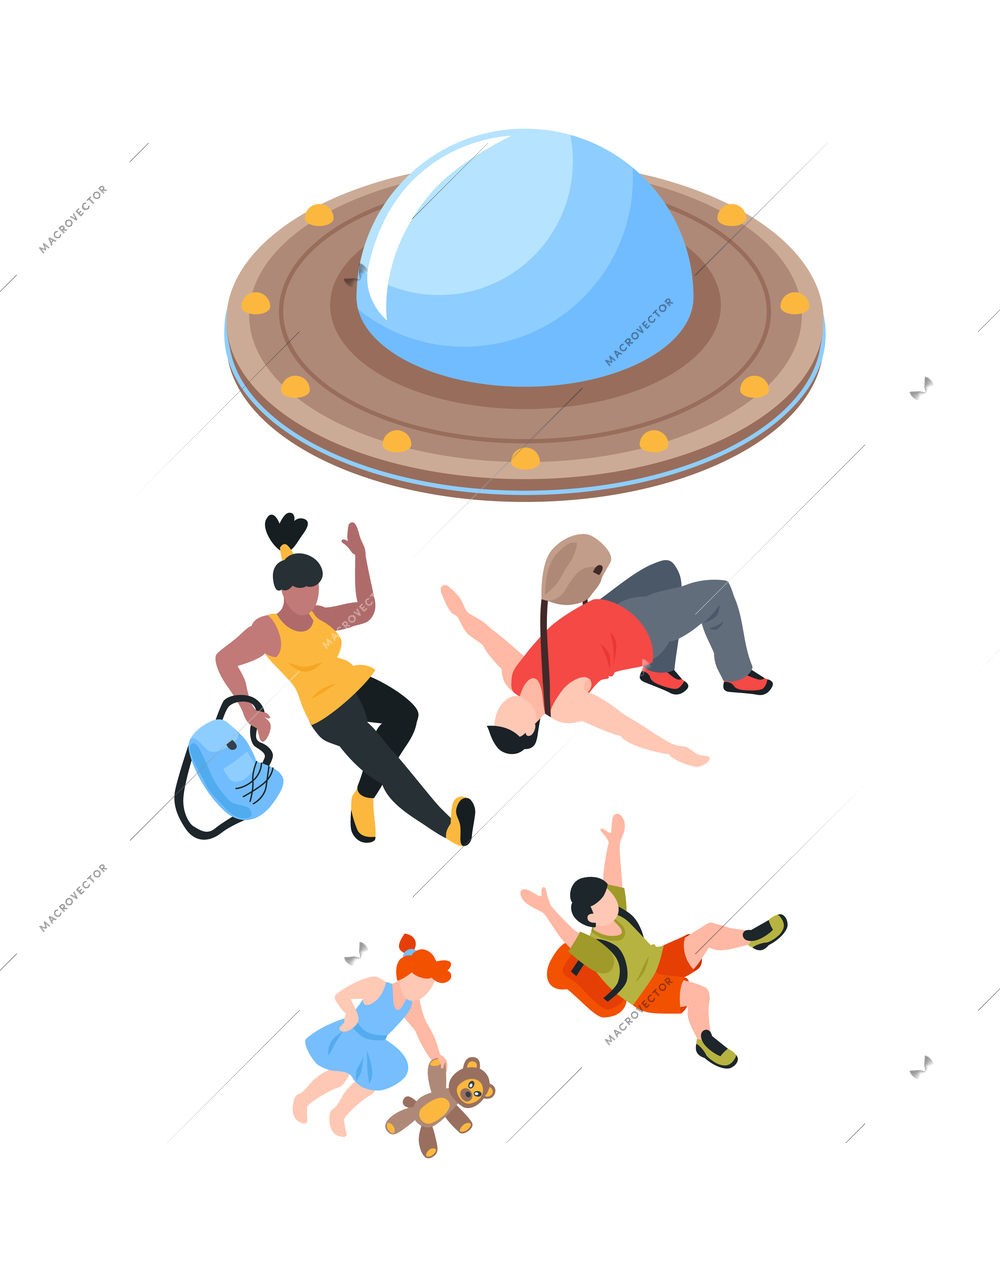 Isometric ufo alien space ship people composition with flying ufo kidnapping adult people and kids vector illustration